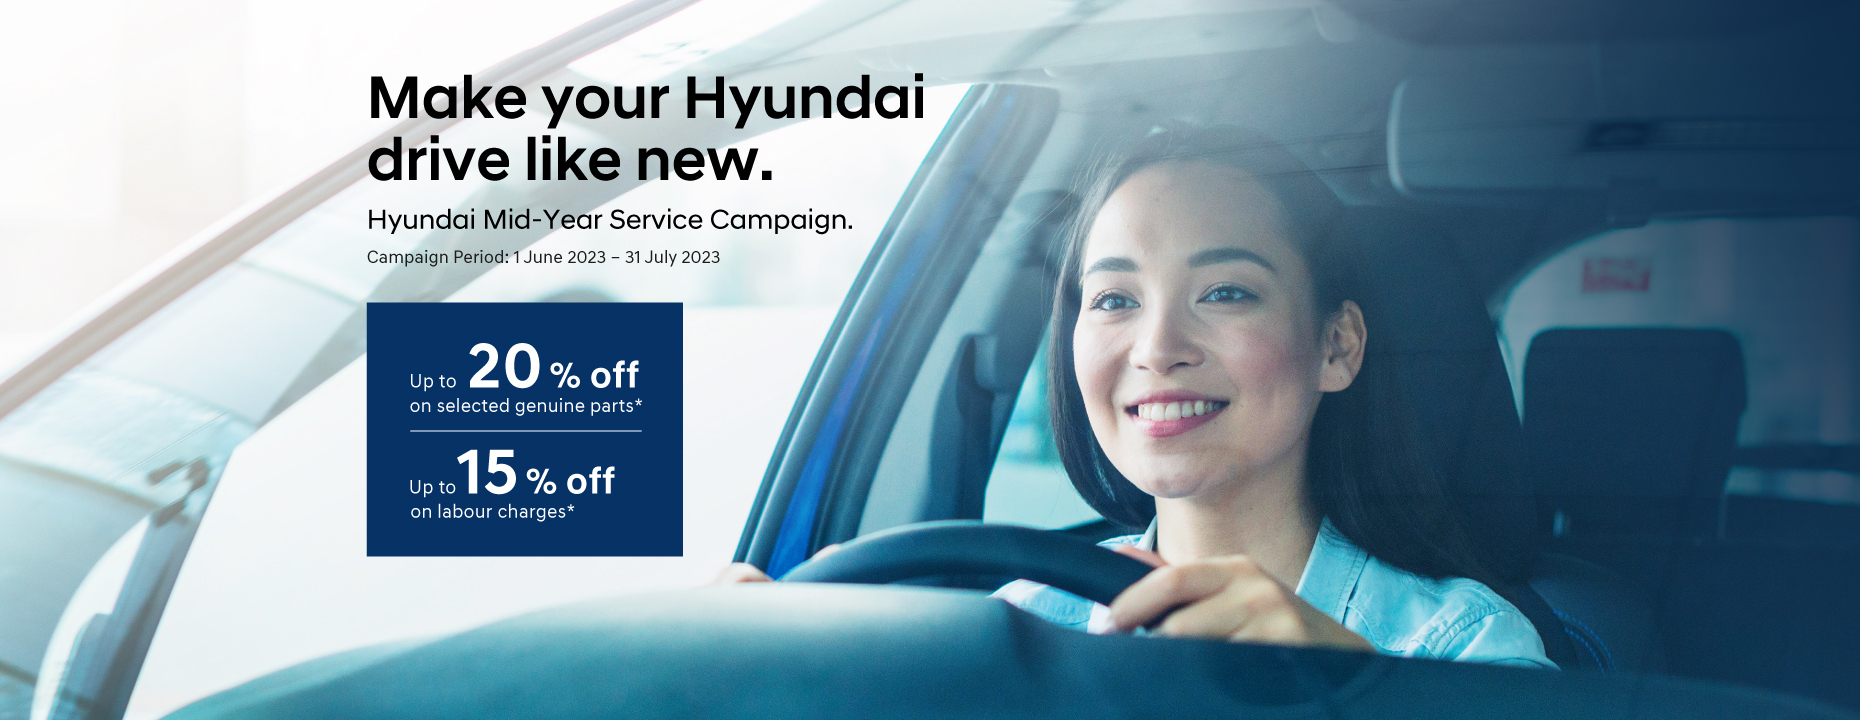 Make your Hyundai drive like new. Hyundai Mid-Year Service Campaign. | Up to 20% off on selected genuine parts* | Up to 15% off on labour charges* | Campaign Period : 1 June 2023 - 31 July 2023 | Terms and conditions apply.